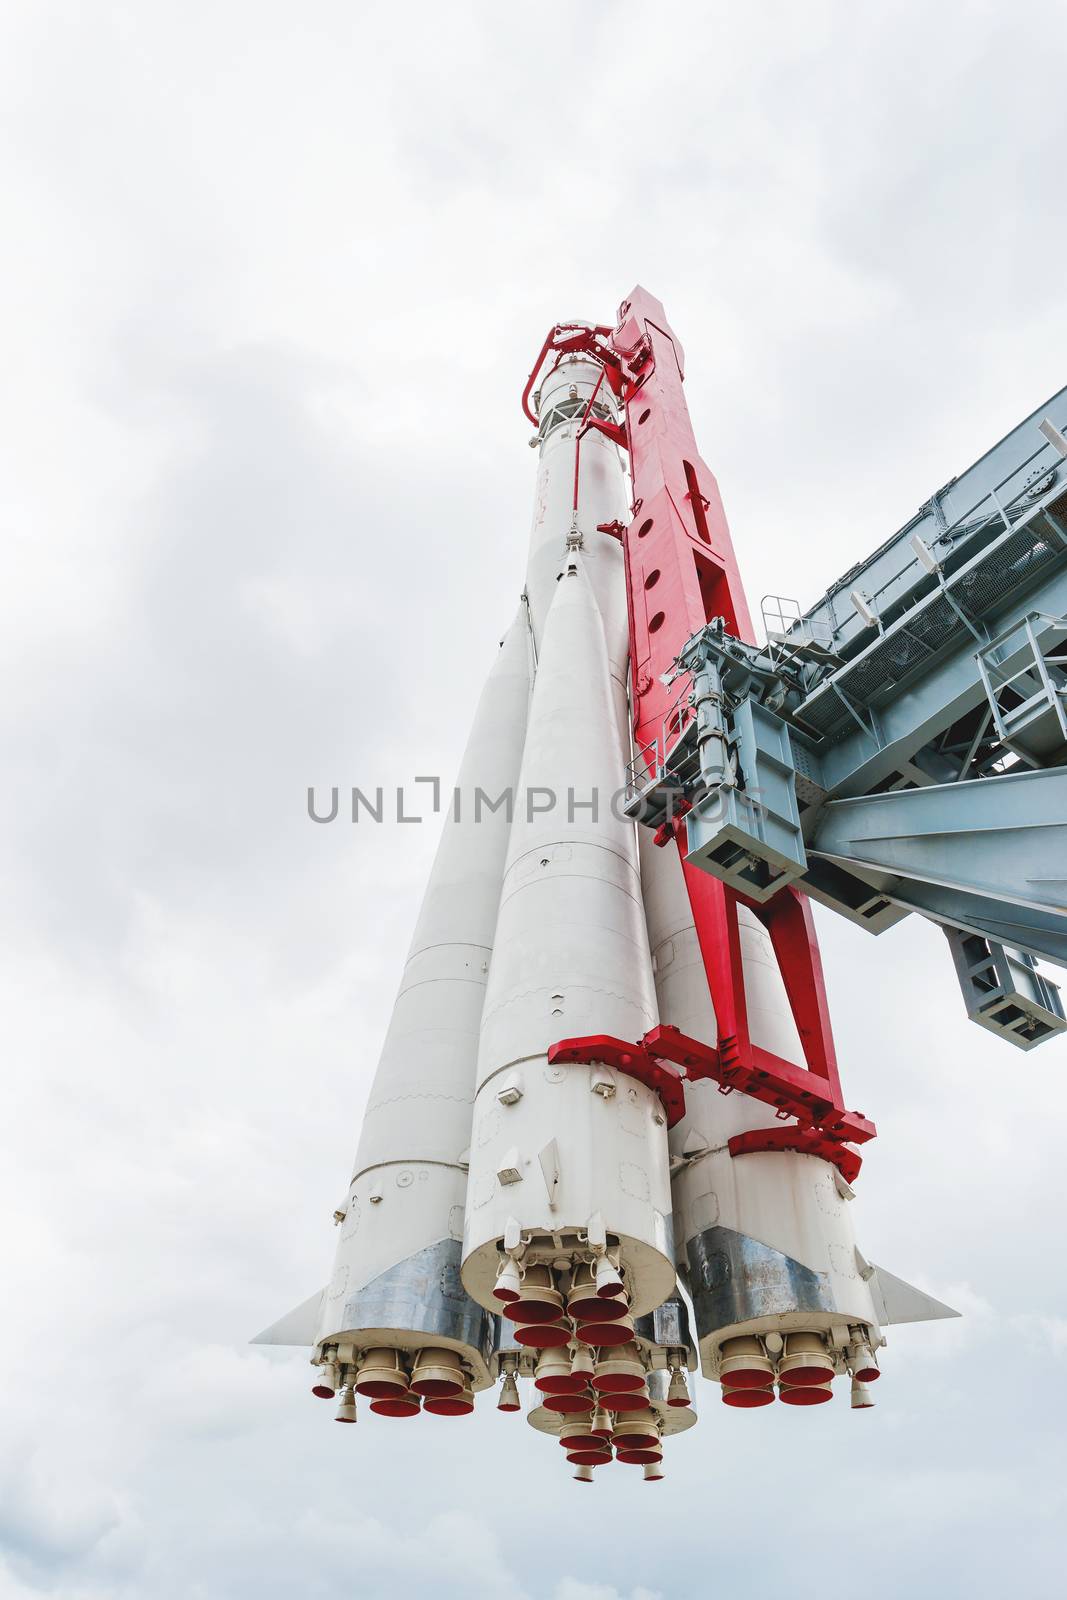 Copy of space launch vehicle "Vostok". Rocket model at VDNH ("The Exhibition of achievements of national economy") in Moscow, Russia. by aksenovko